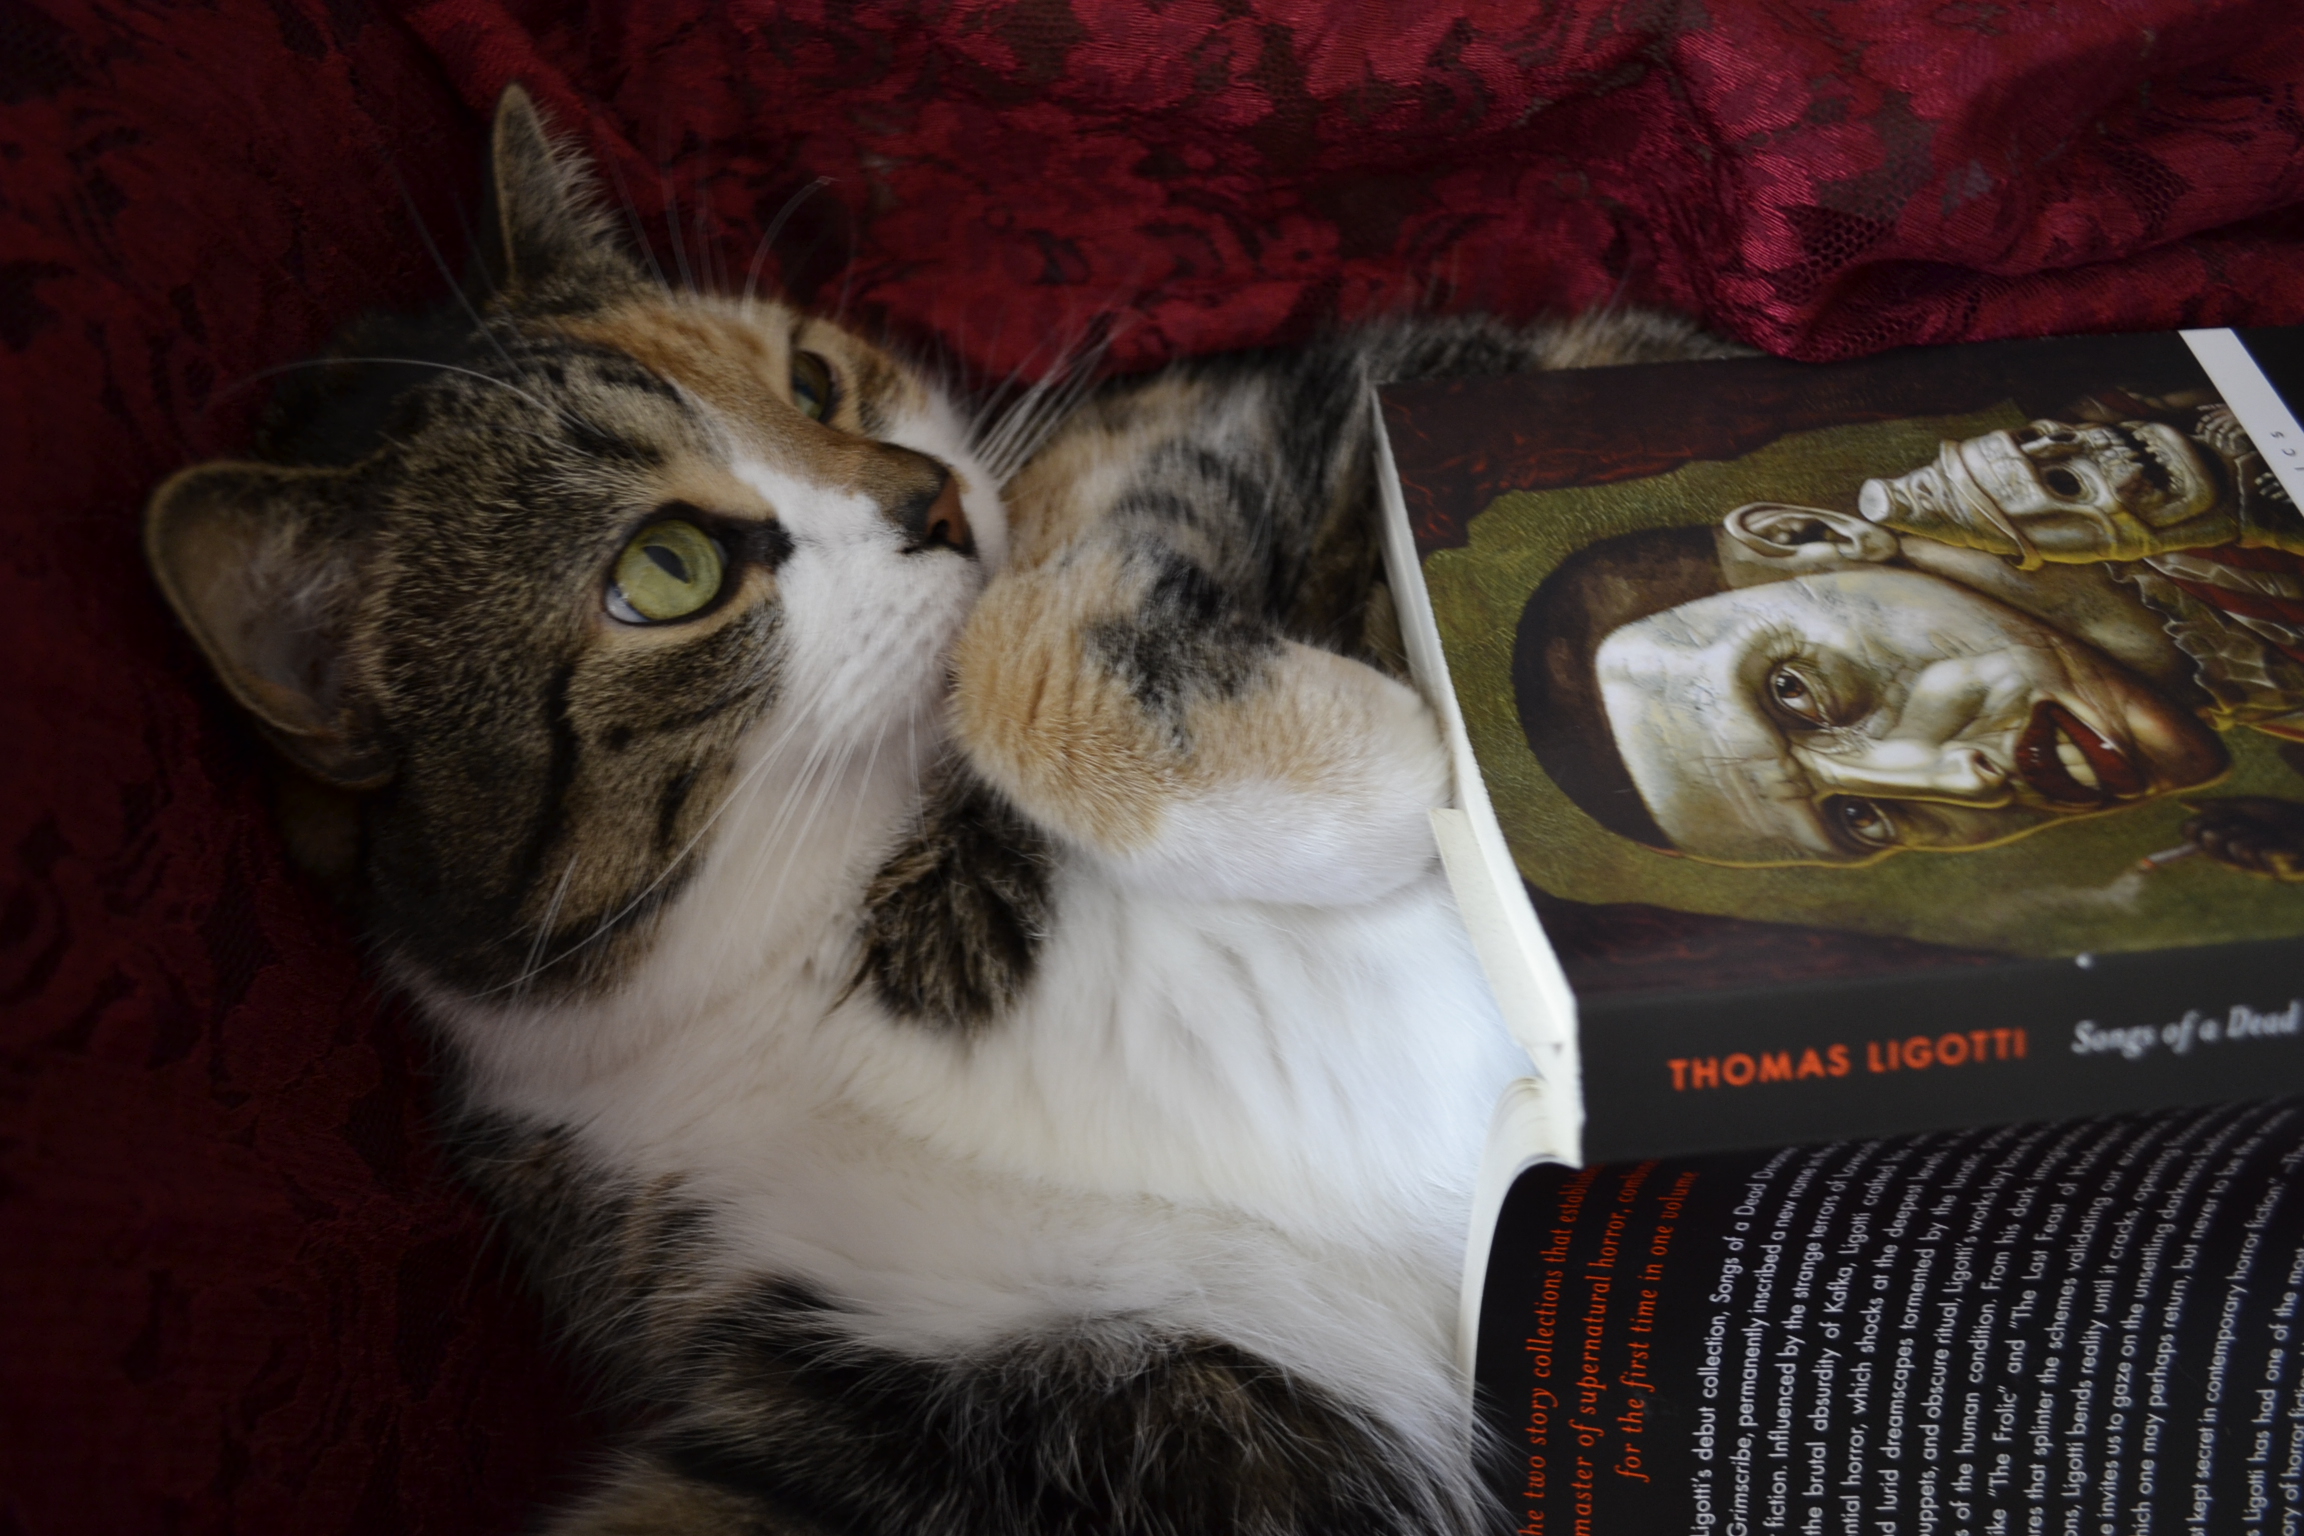 A calico tabby lies with a book by Thomas Ligotti on her stomach.